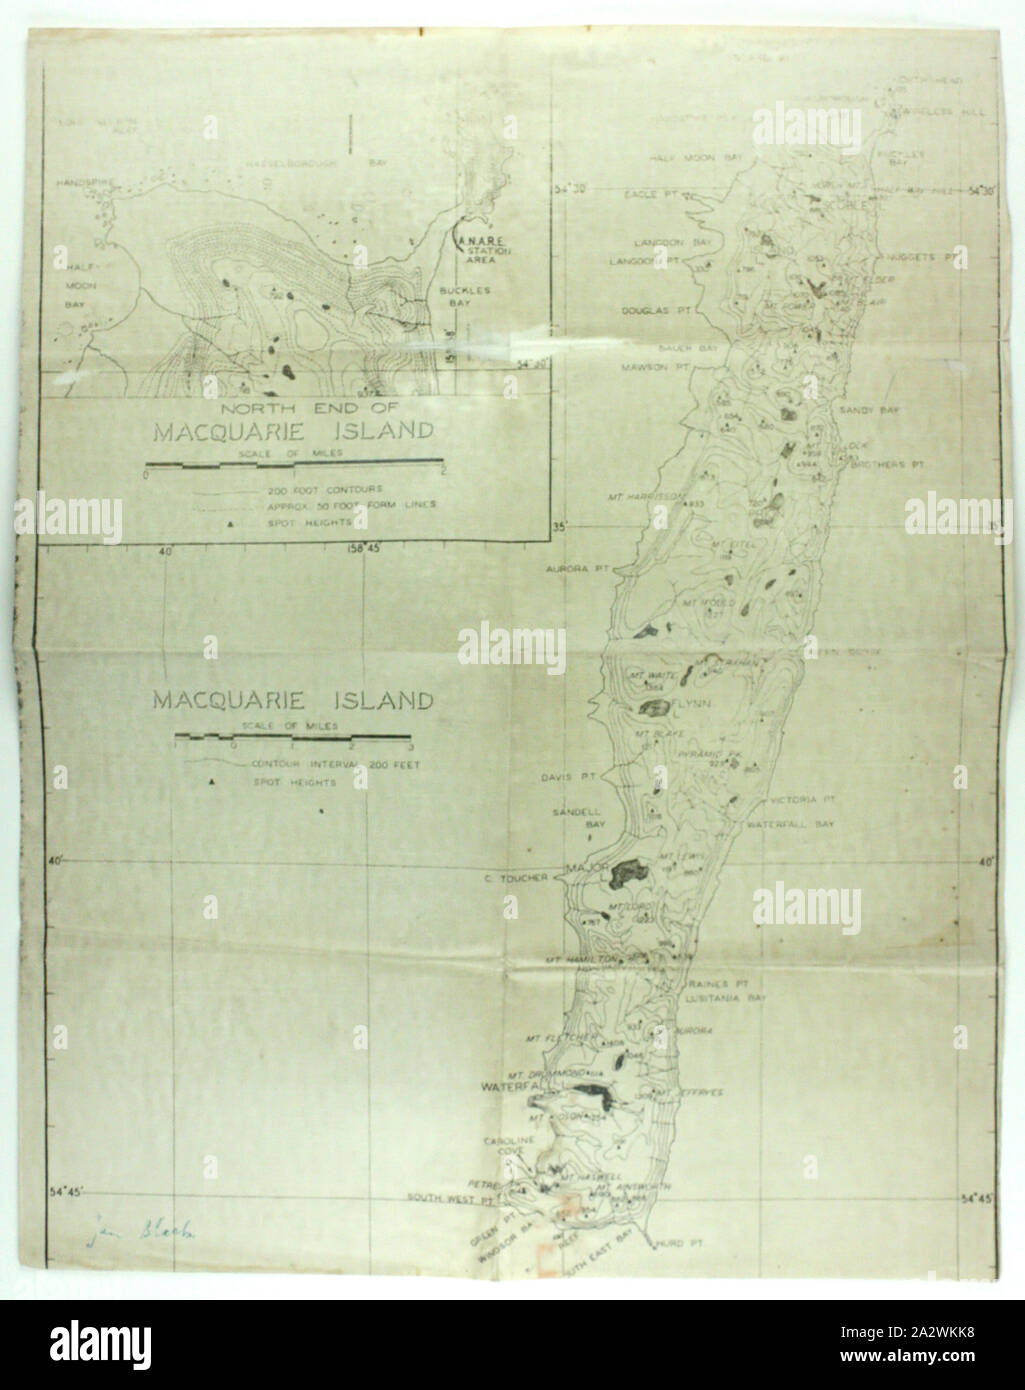 Map - Macquarie Island, Tasmania, post 1948, Map of Macquarie Island showing place names, elevations, navigation co-ordinates, using imperial measurements. Hope Macpherson was the first female curator at National Museum of Victoria (now Museum Victoria). Hope along with Isobel Bennett, Susan Ingham and Mary Gillham were the first women to visit the Antarctic in their December 1959 expedition to Macquarie Island Stock Photo